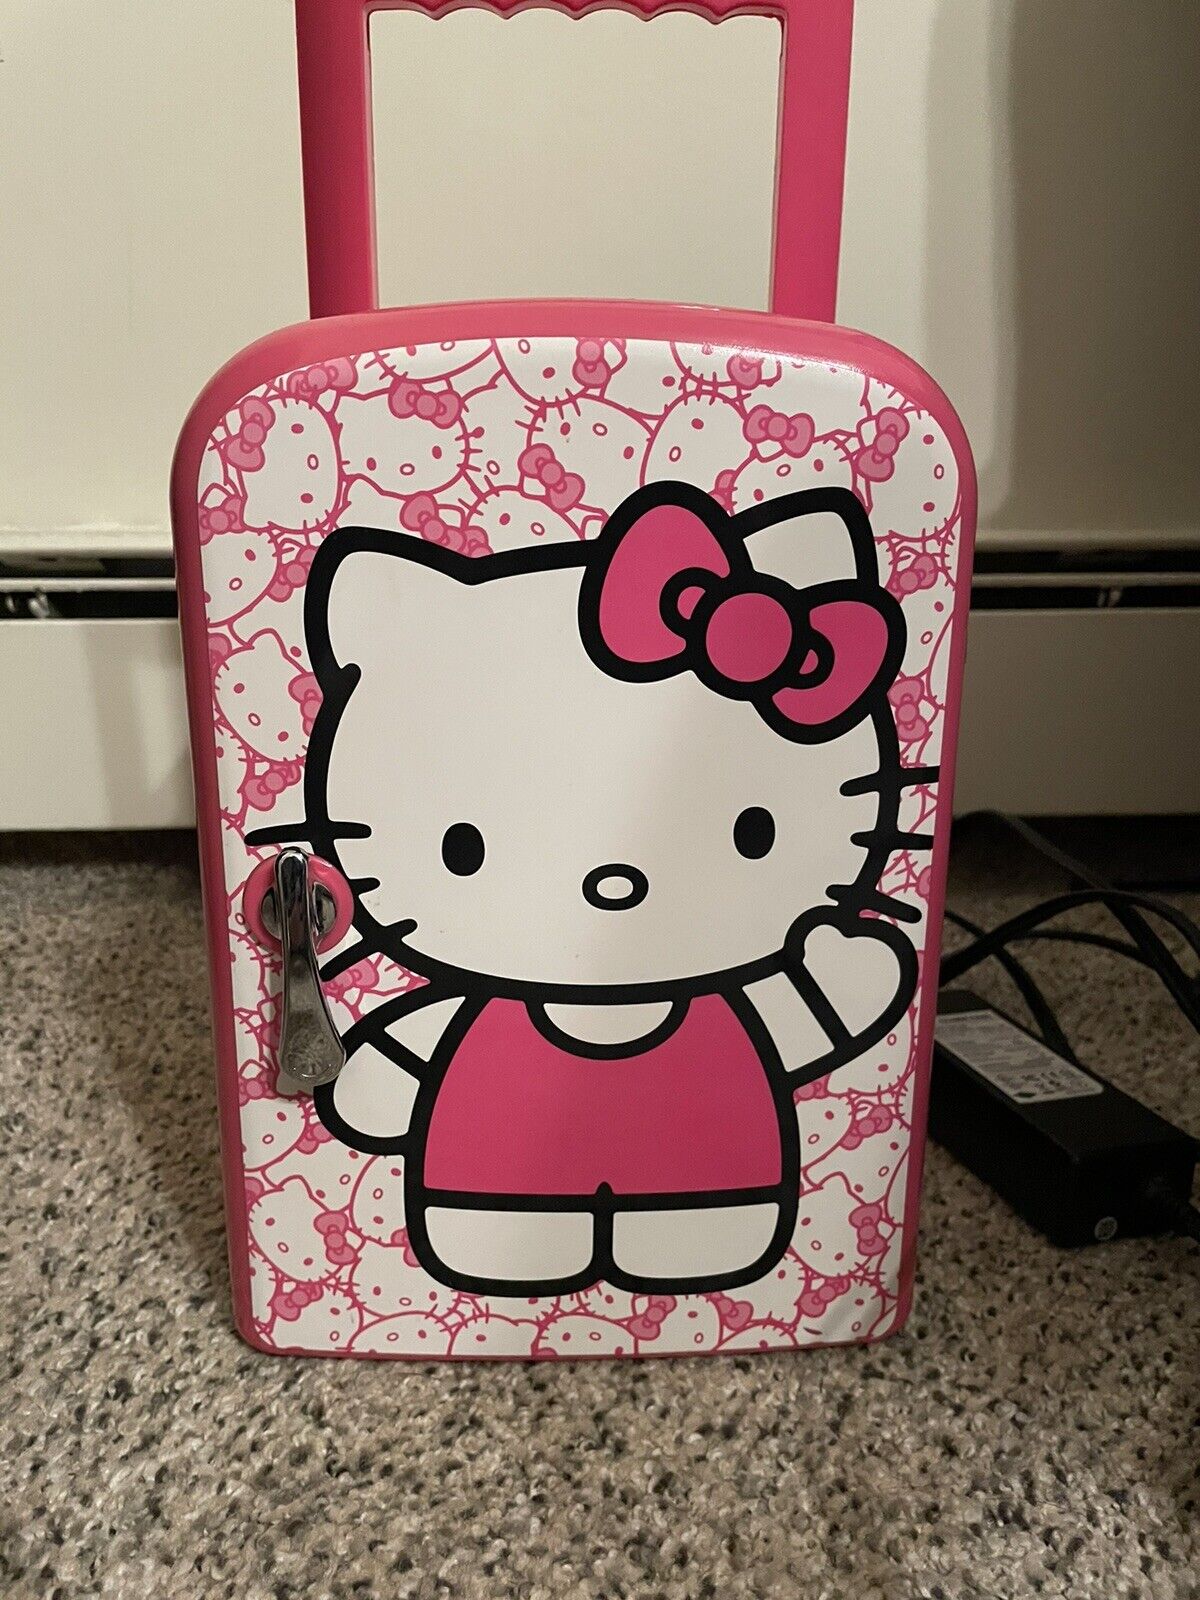 Discontinued Sanrio Hello Kitty Mini Refrigerator 81129-COOLS AND WARMS-TESTED